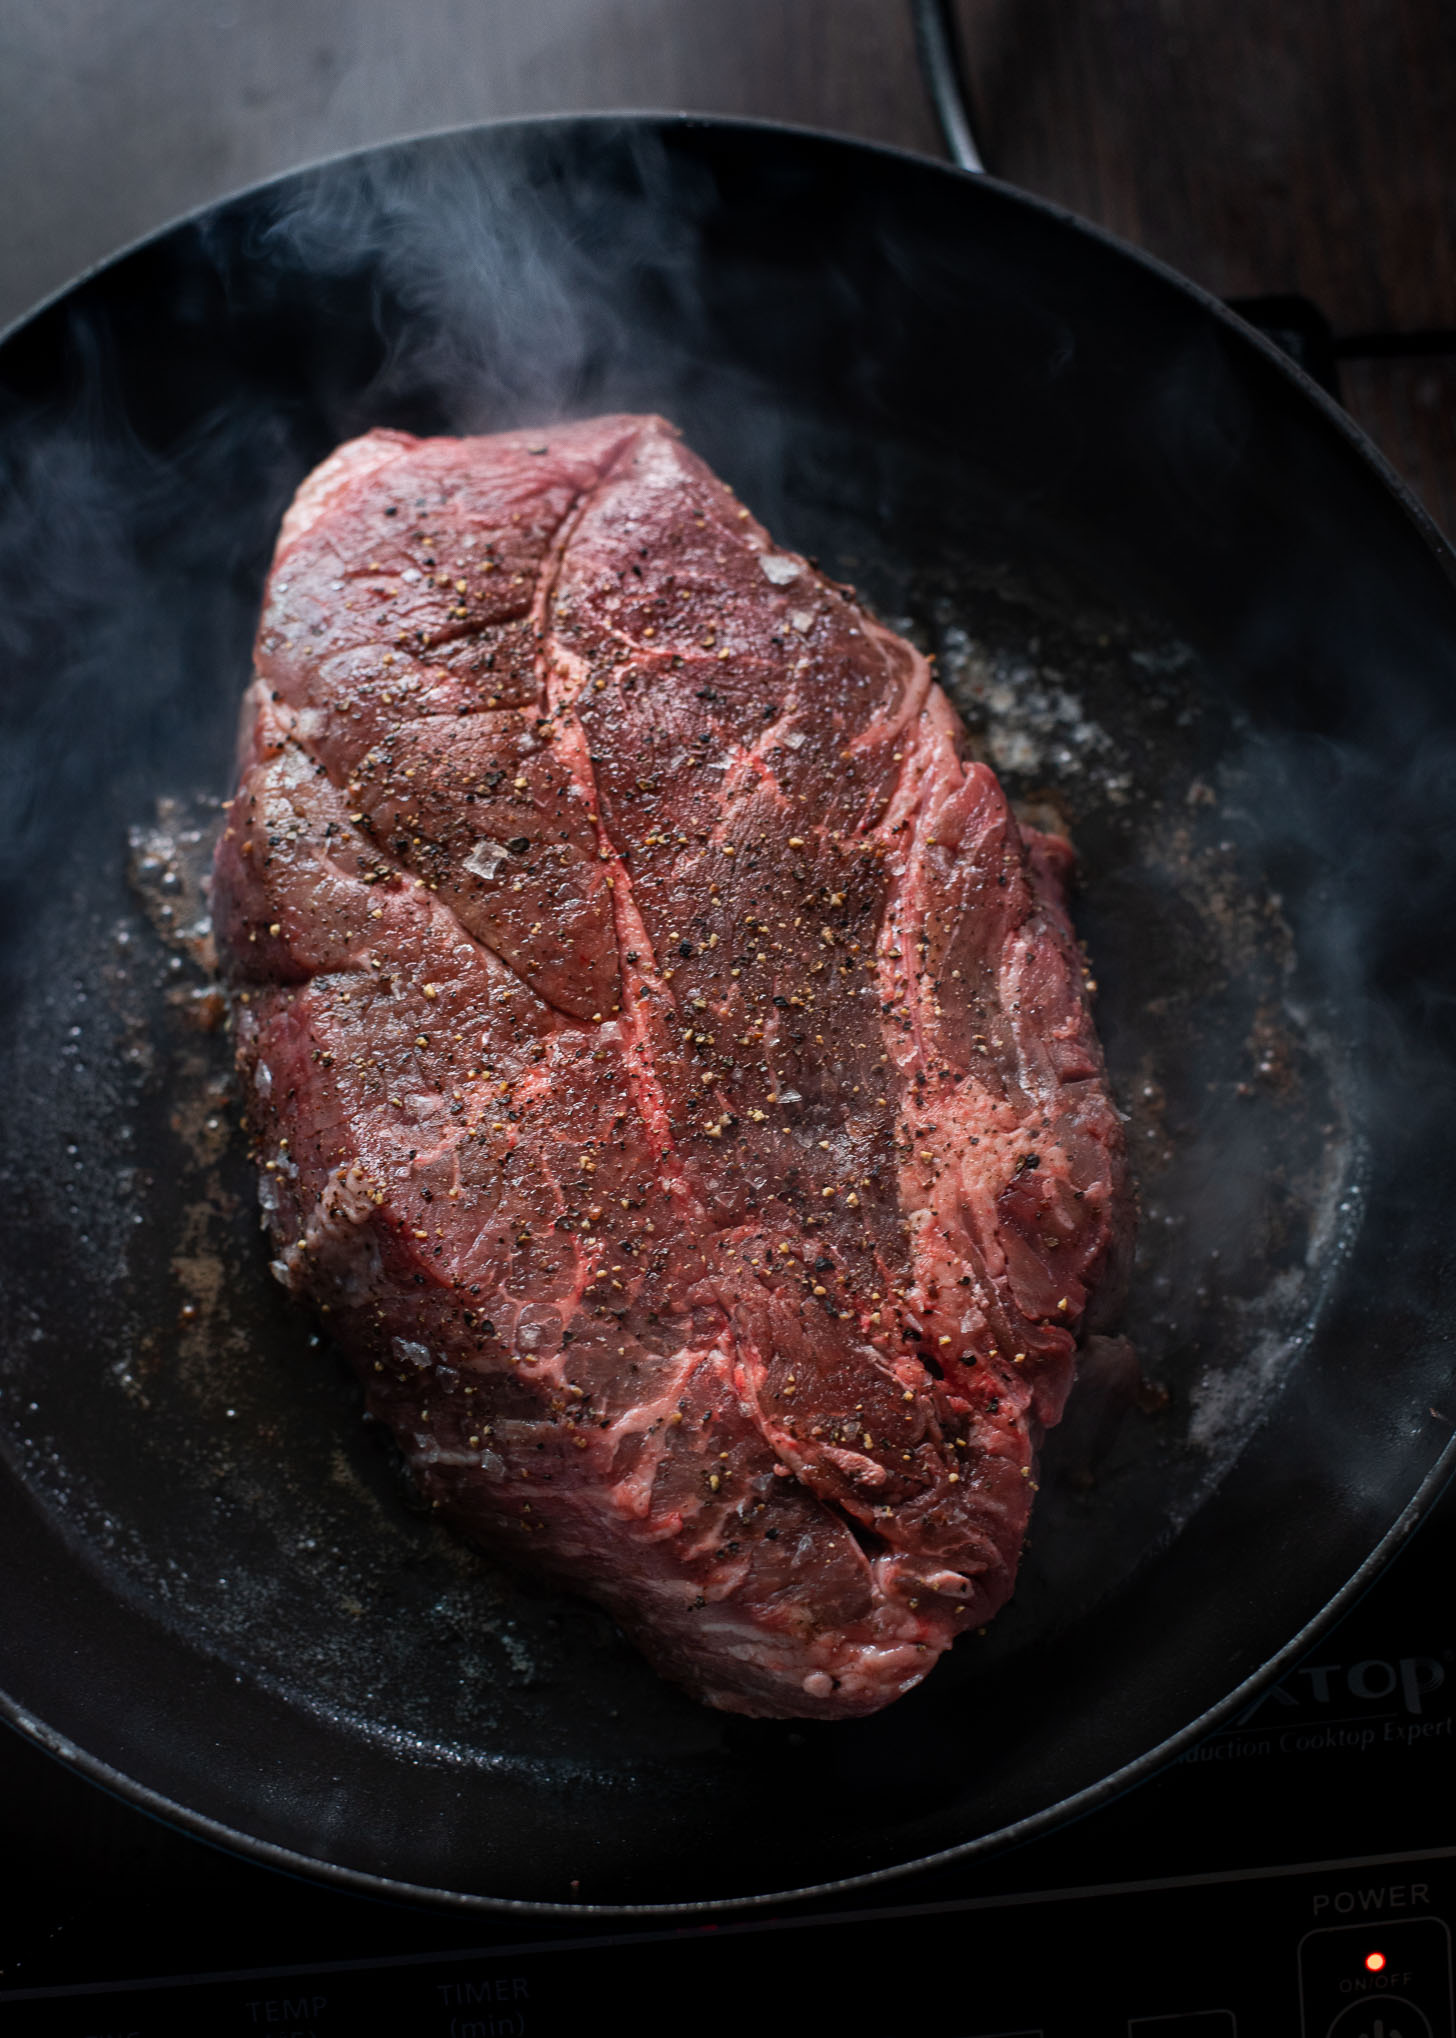 A piece of beef chuck is seasoned and getting seared in a pan.